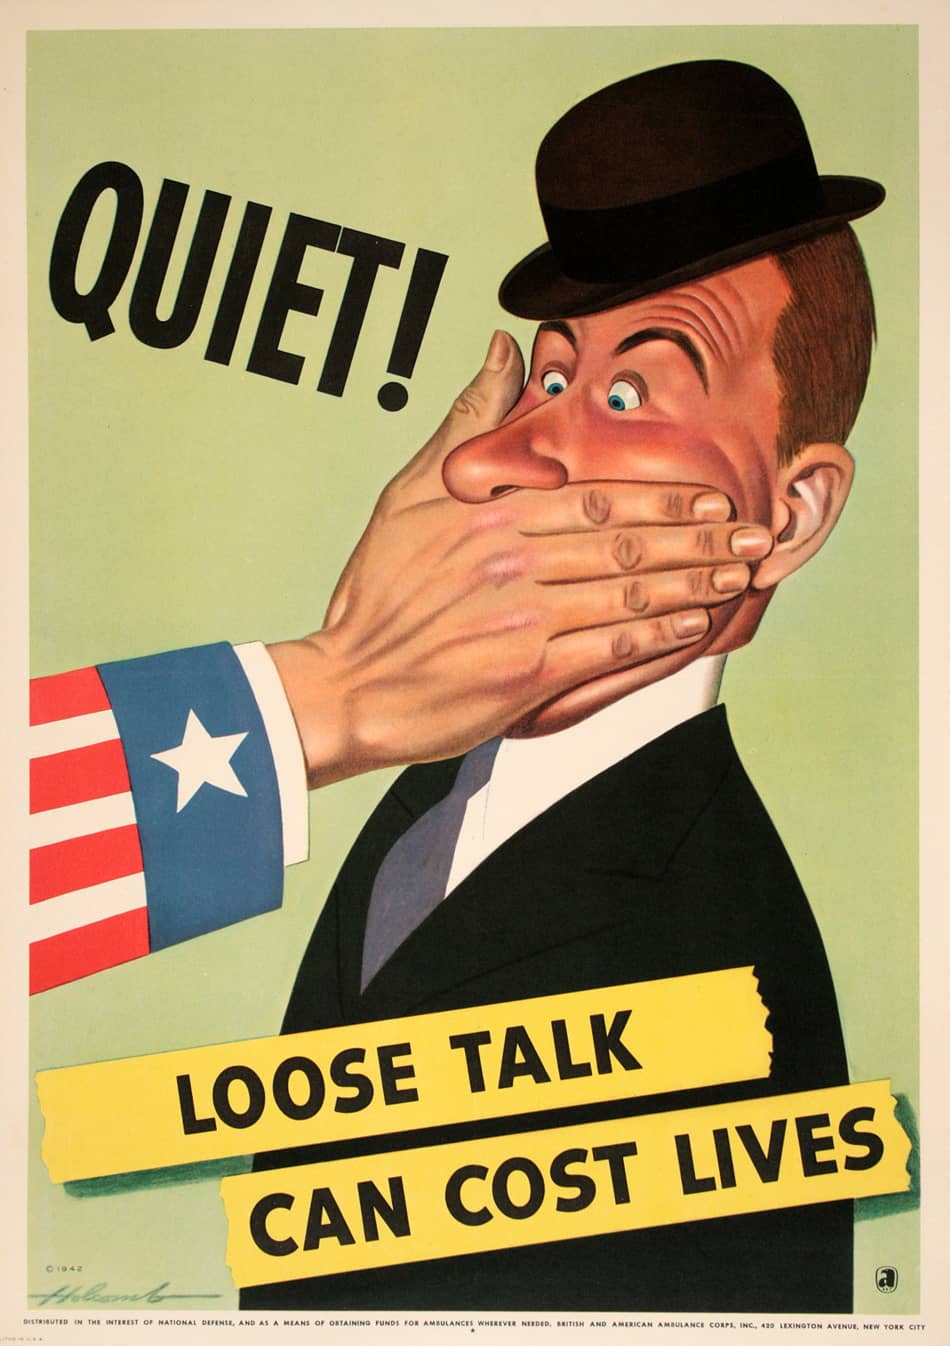 Original World War II Poster - Loose Talk can Cost Lives Quiet by Holcomb 1942